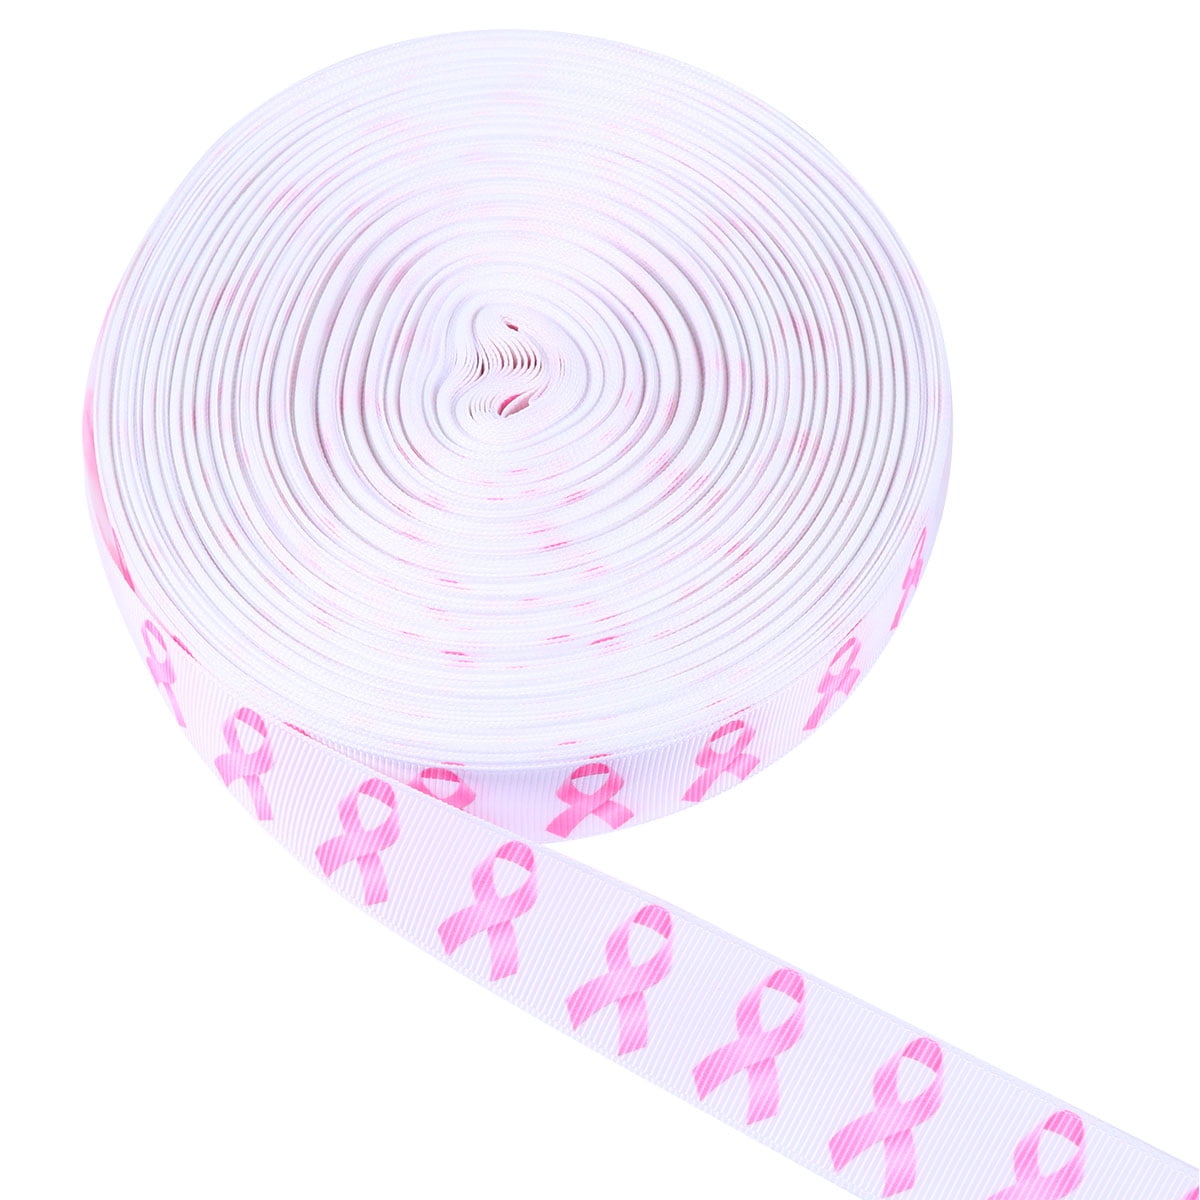 Crowye 100 Yards 4 Rolls Breast Cancer Awareness Ribbon 3/8 Inches Per Roll  Grosgrain Pink Ribbon Printed Craft Ribbon for Crafts Party Wreath